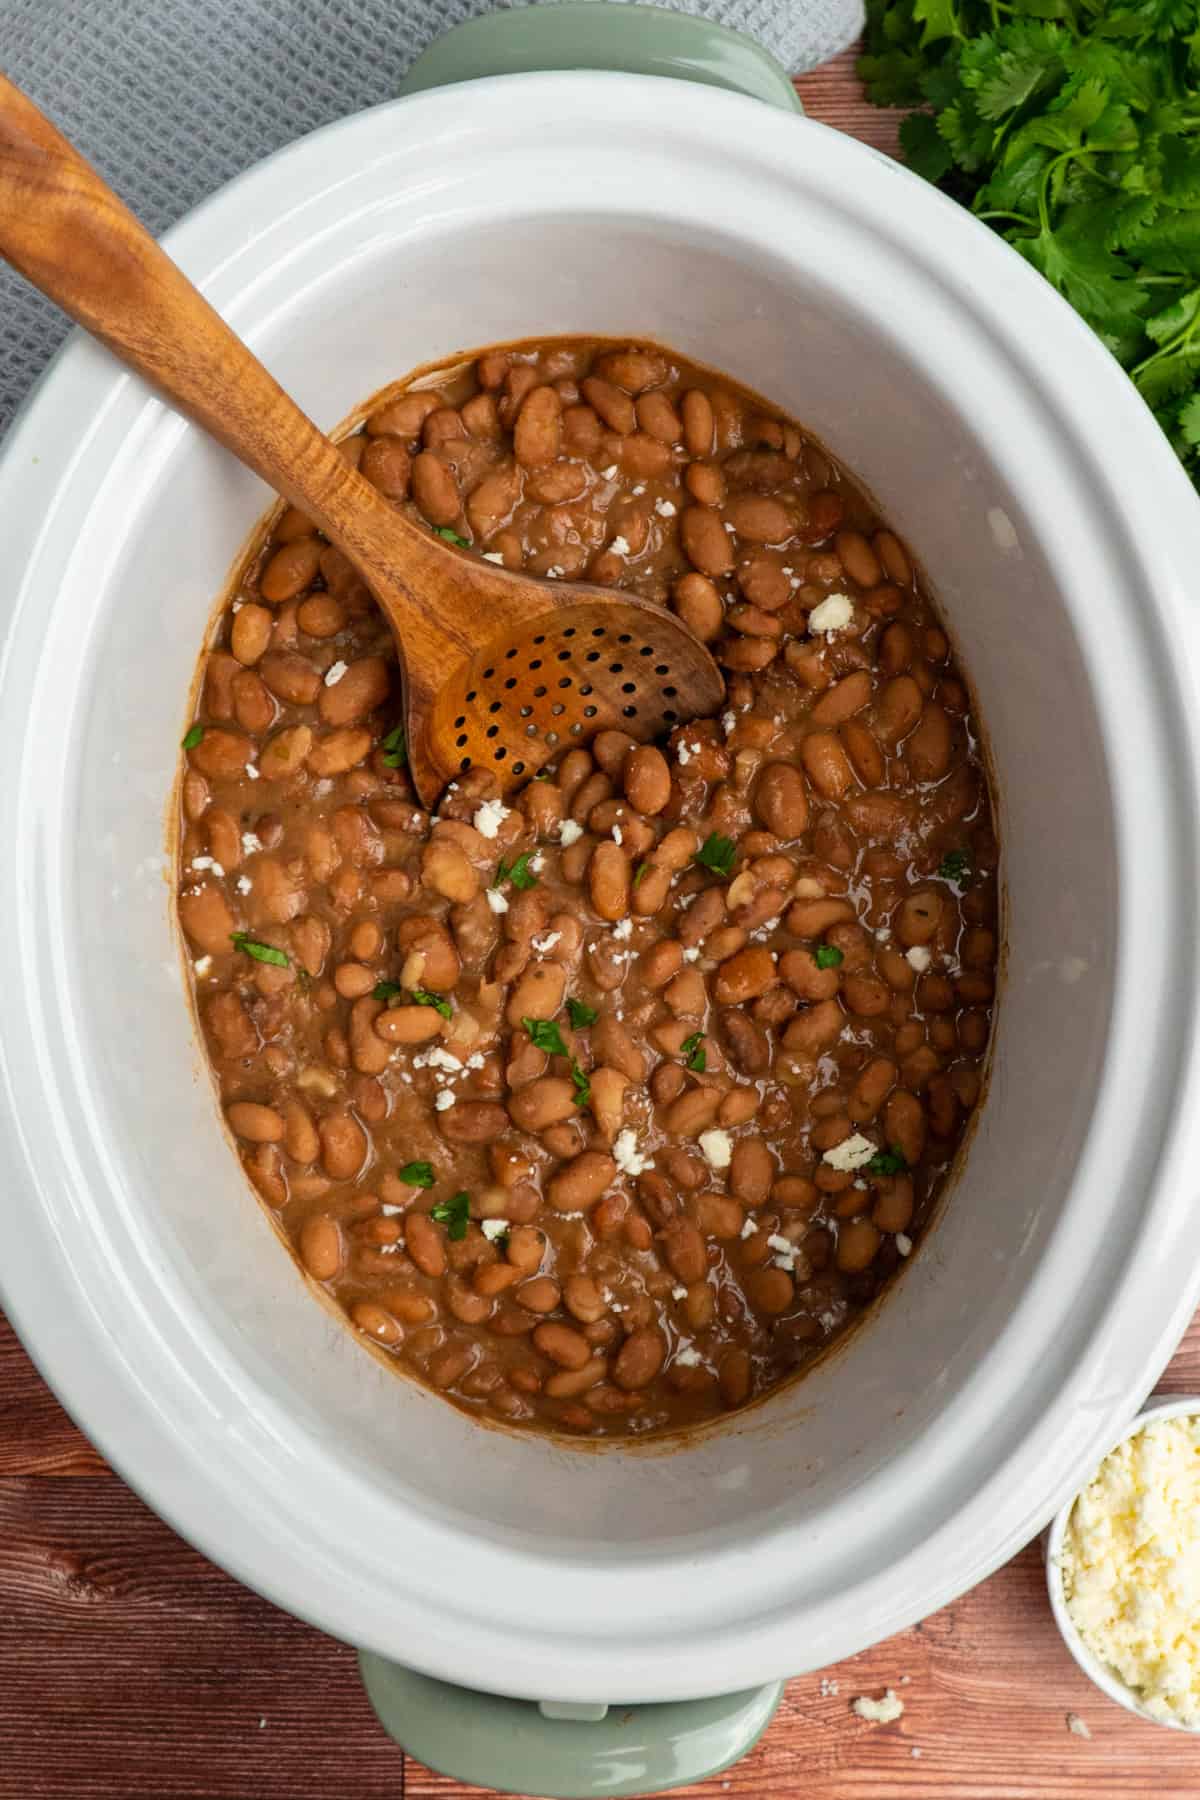 Overhead image of pinto beans in a crock pot with a wooden spoon.